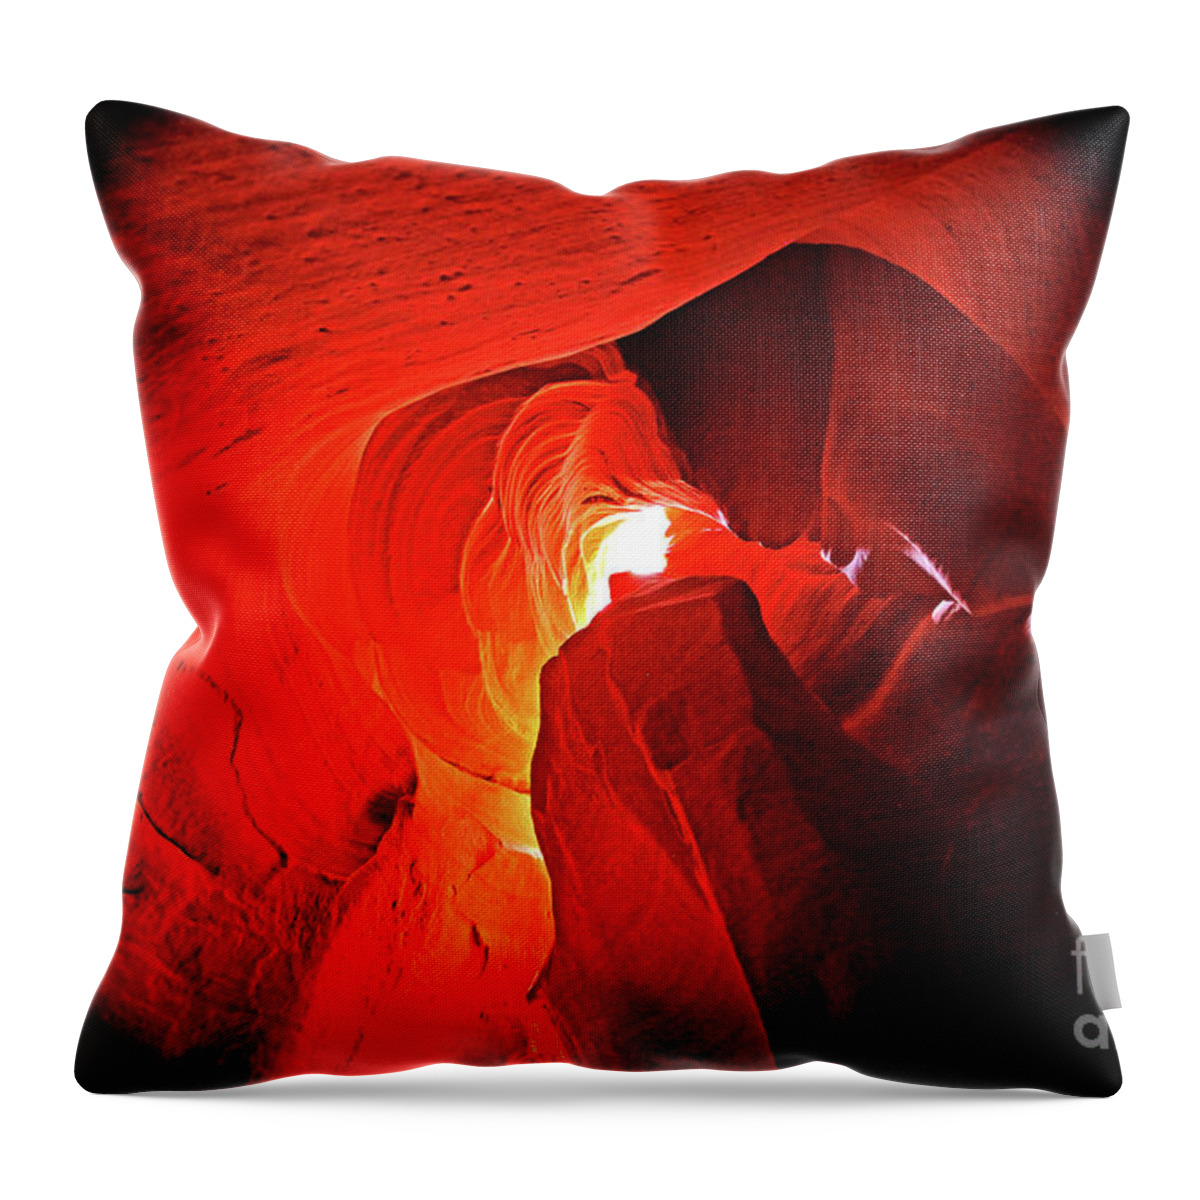  Throw Pillow featuring the digital art Slot Canyon 1 by Darcy Dietrich